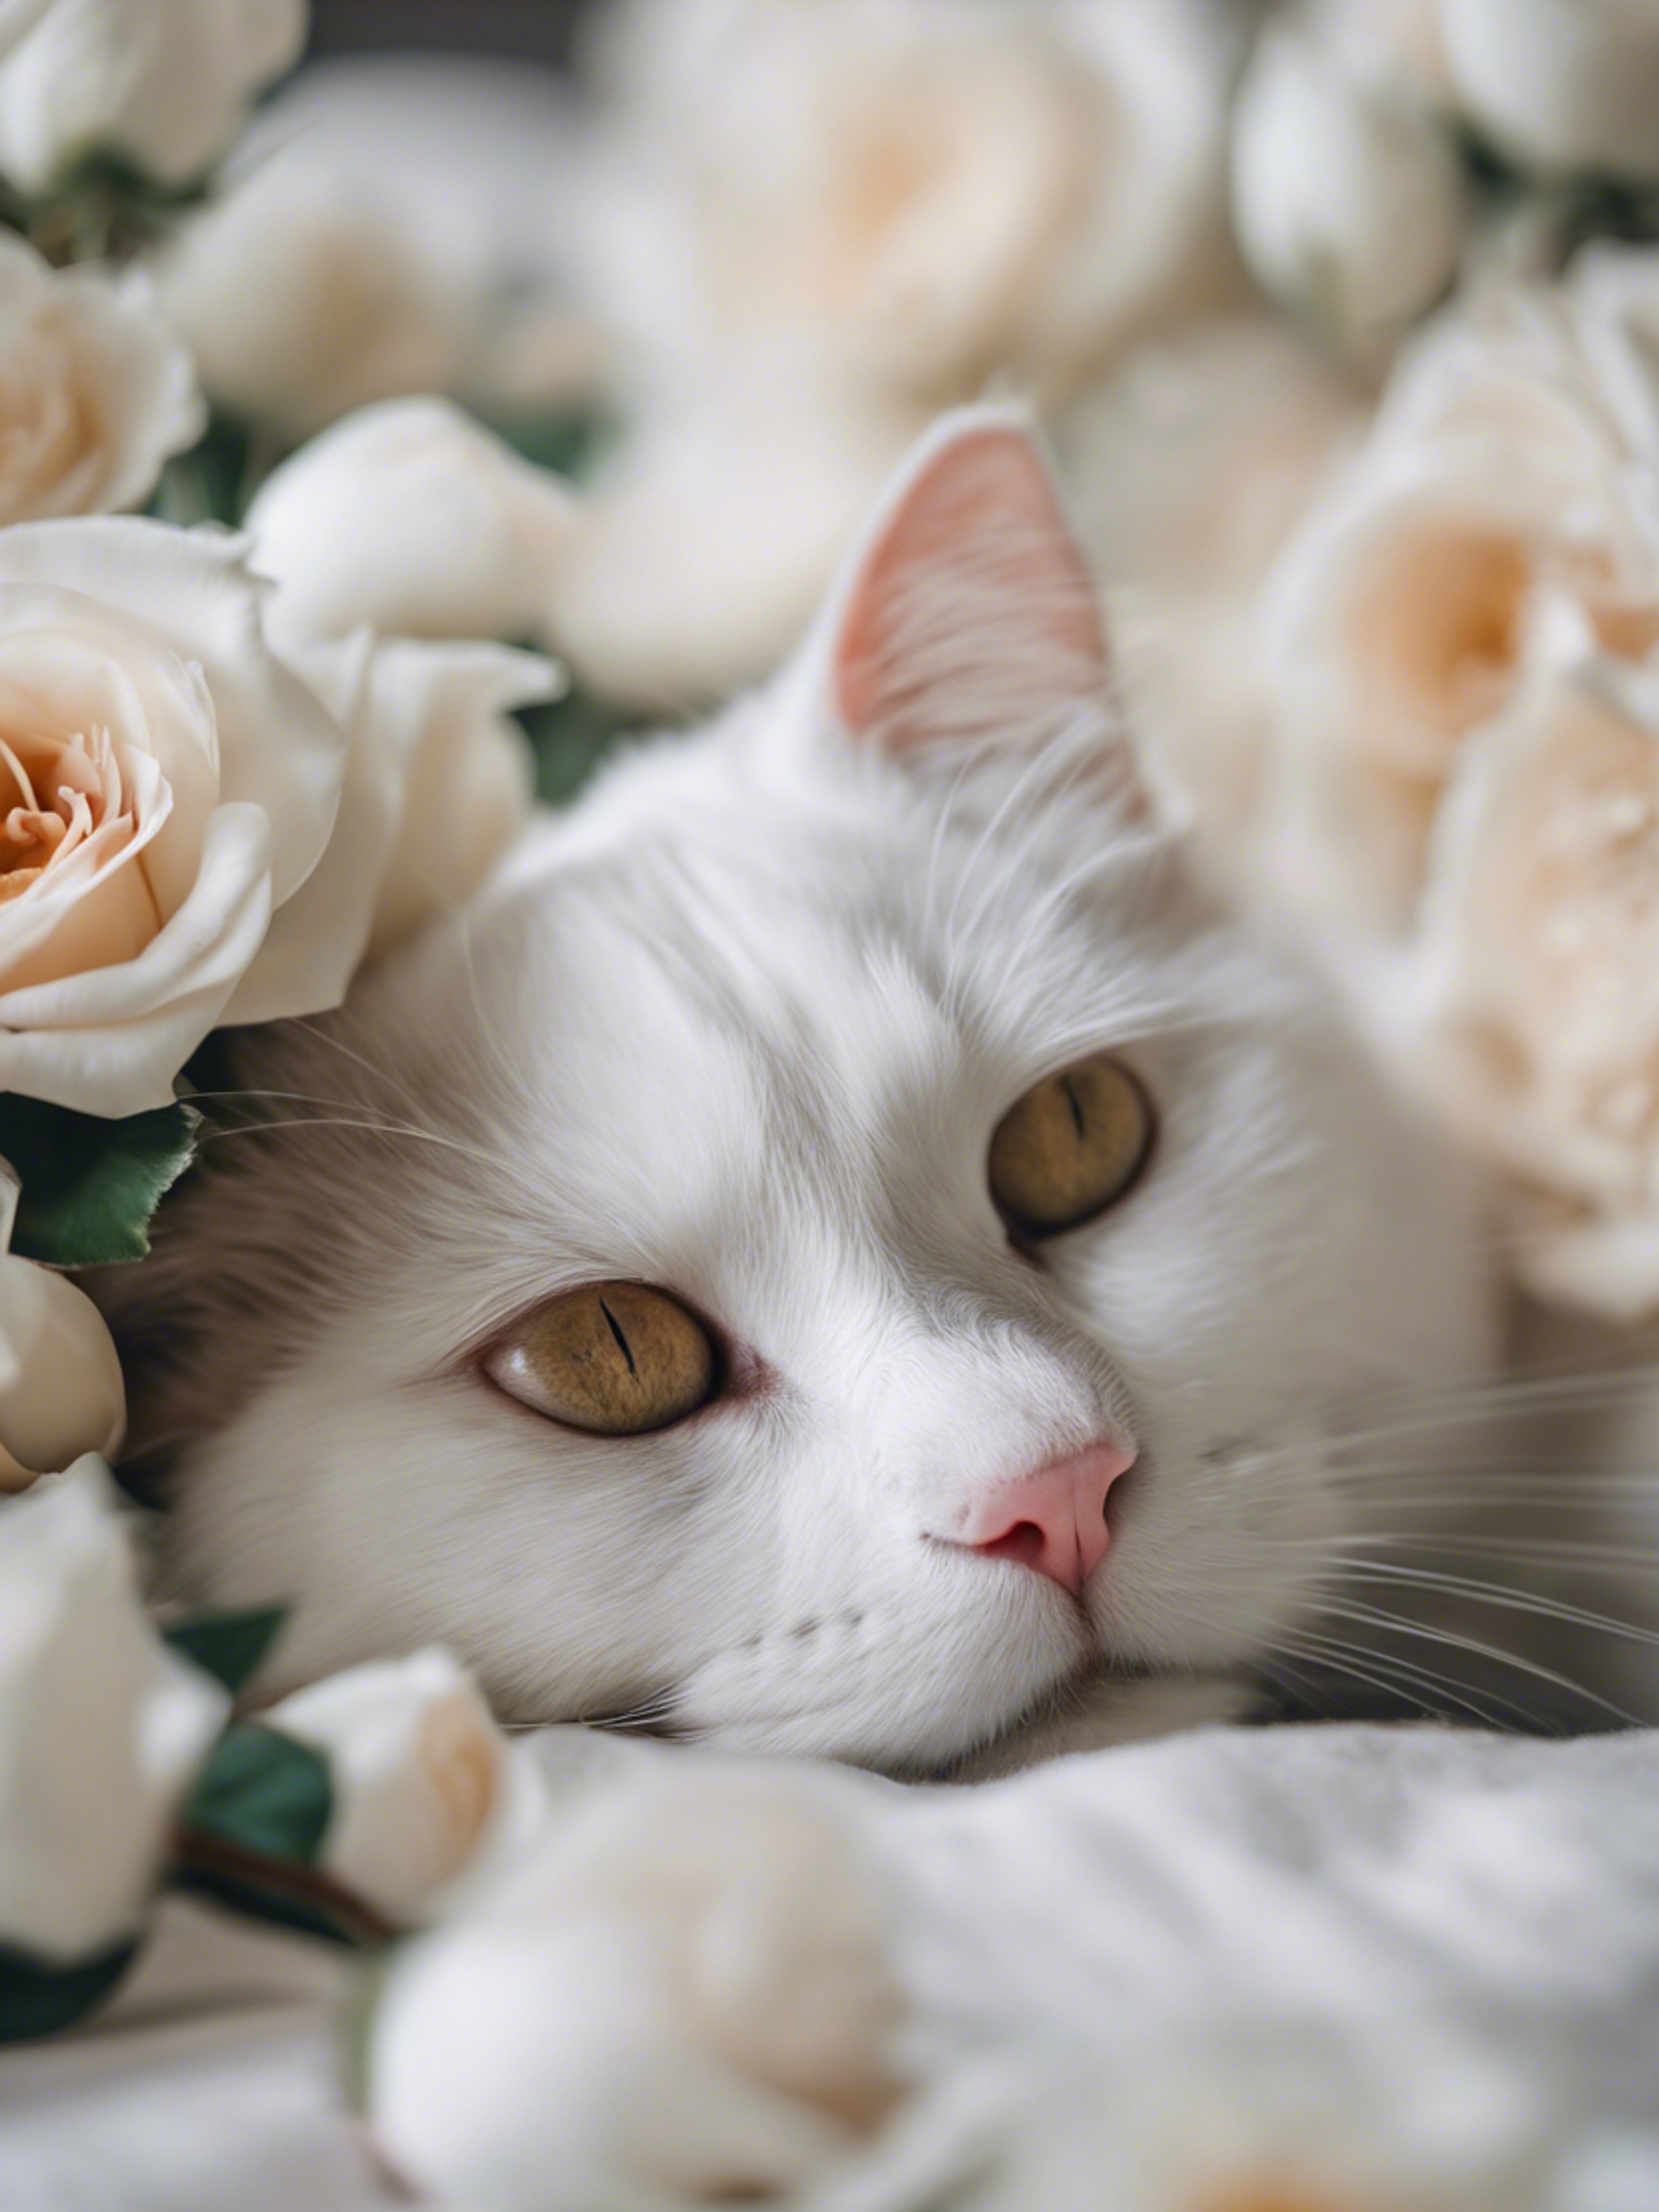 A picturesque content white cat sleeping amidst a bed of white roses. ورق الجدران[21bd514b84c74c92a754]